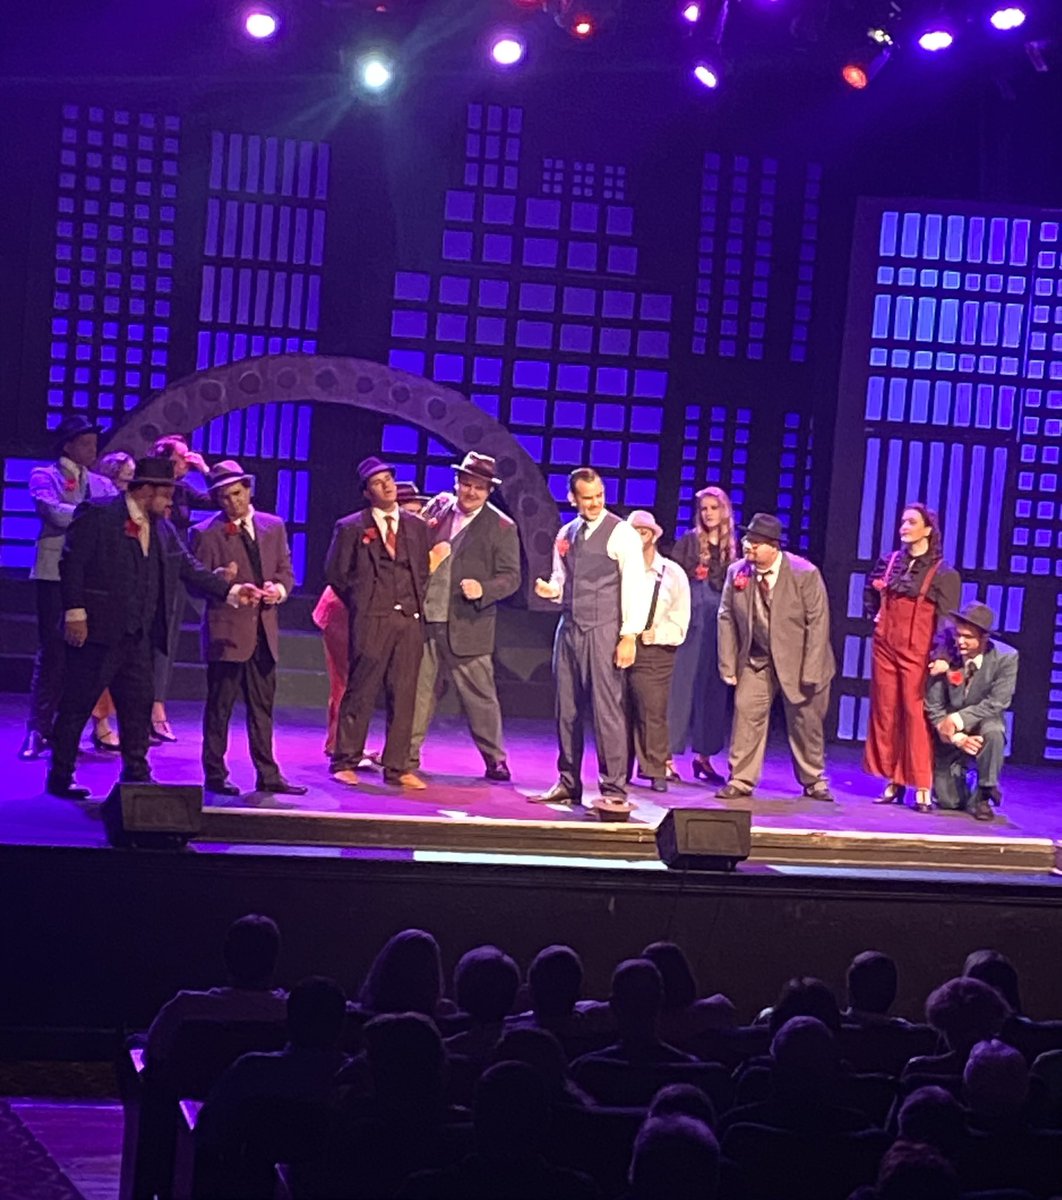 The talent supporting the @GreenwoodCitySC #CommunityTheatre @GwdCommTheatre is superb!  Tonight’s performance of #GuysAndDolls was outstanding.  @DukeEnergy proud to be #SeasonSponsor